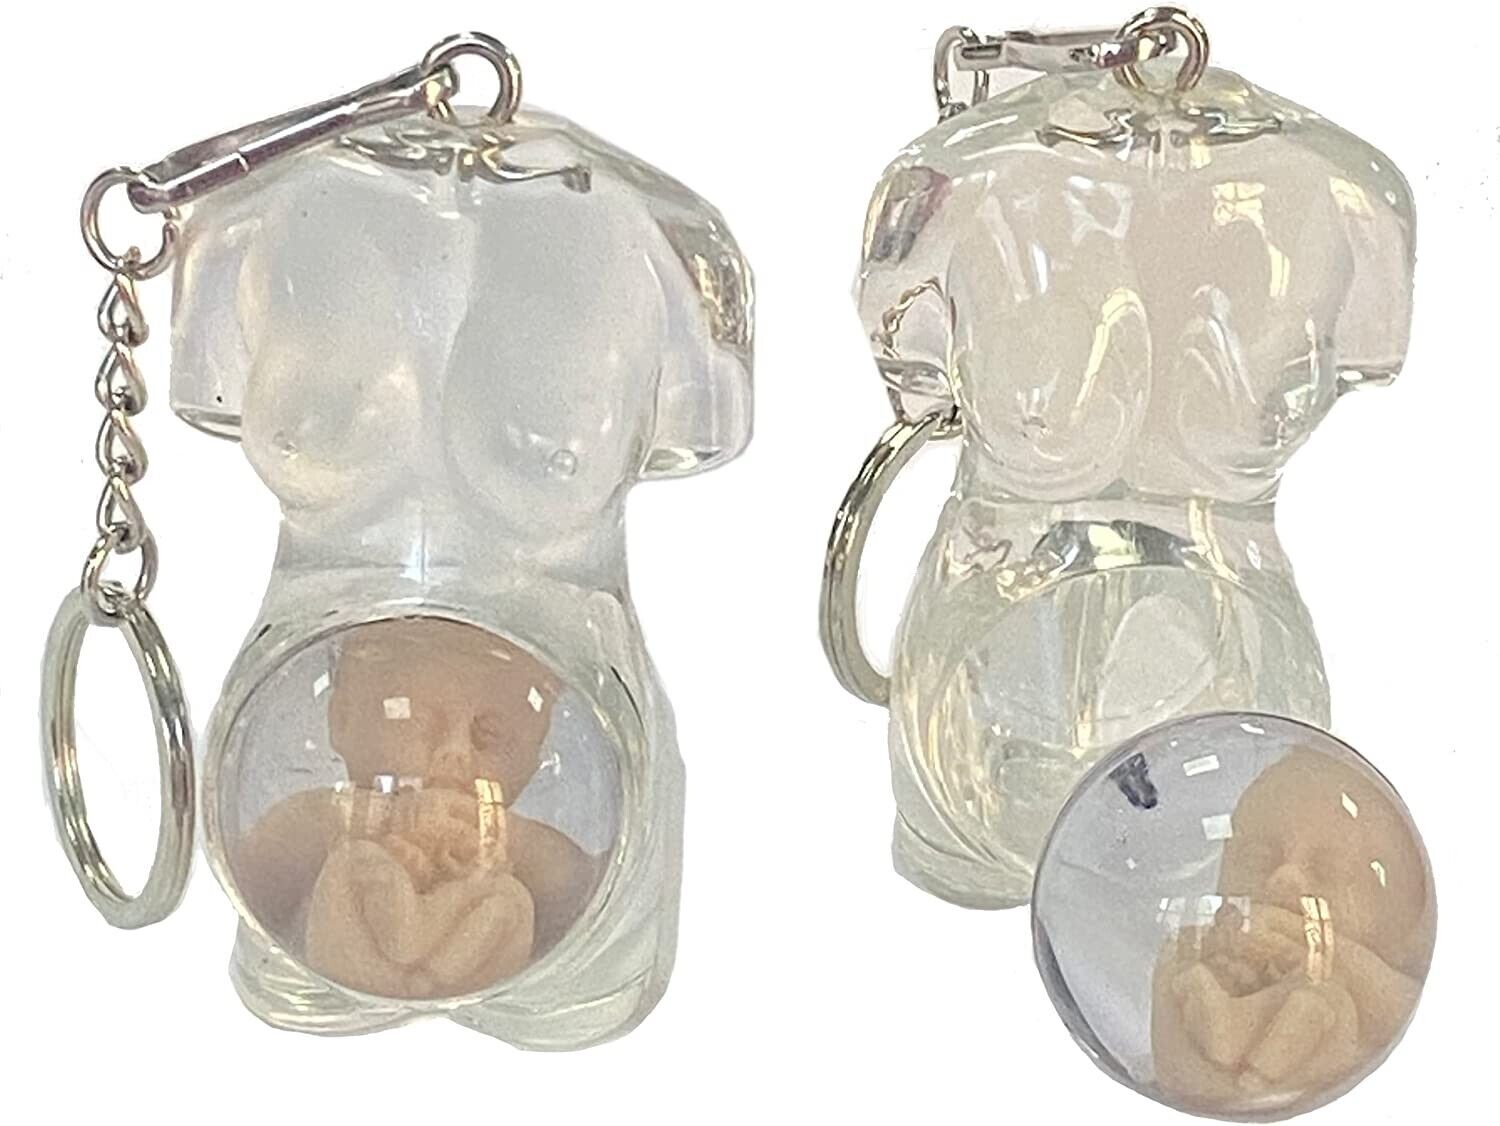 Rare & Cool Mother Baby Keychain  - Pop Out The Ball To 